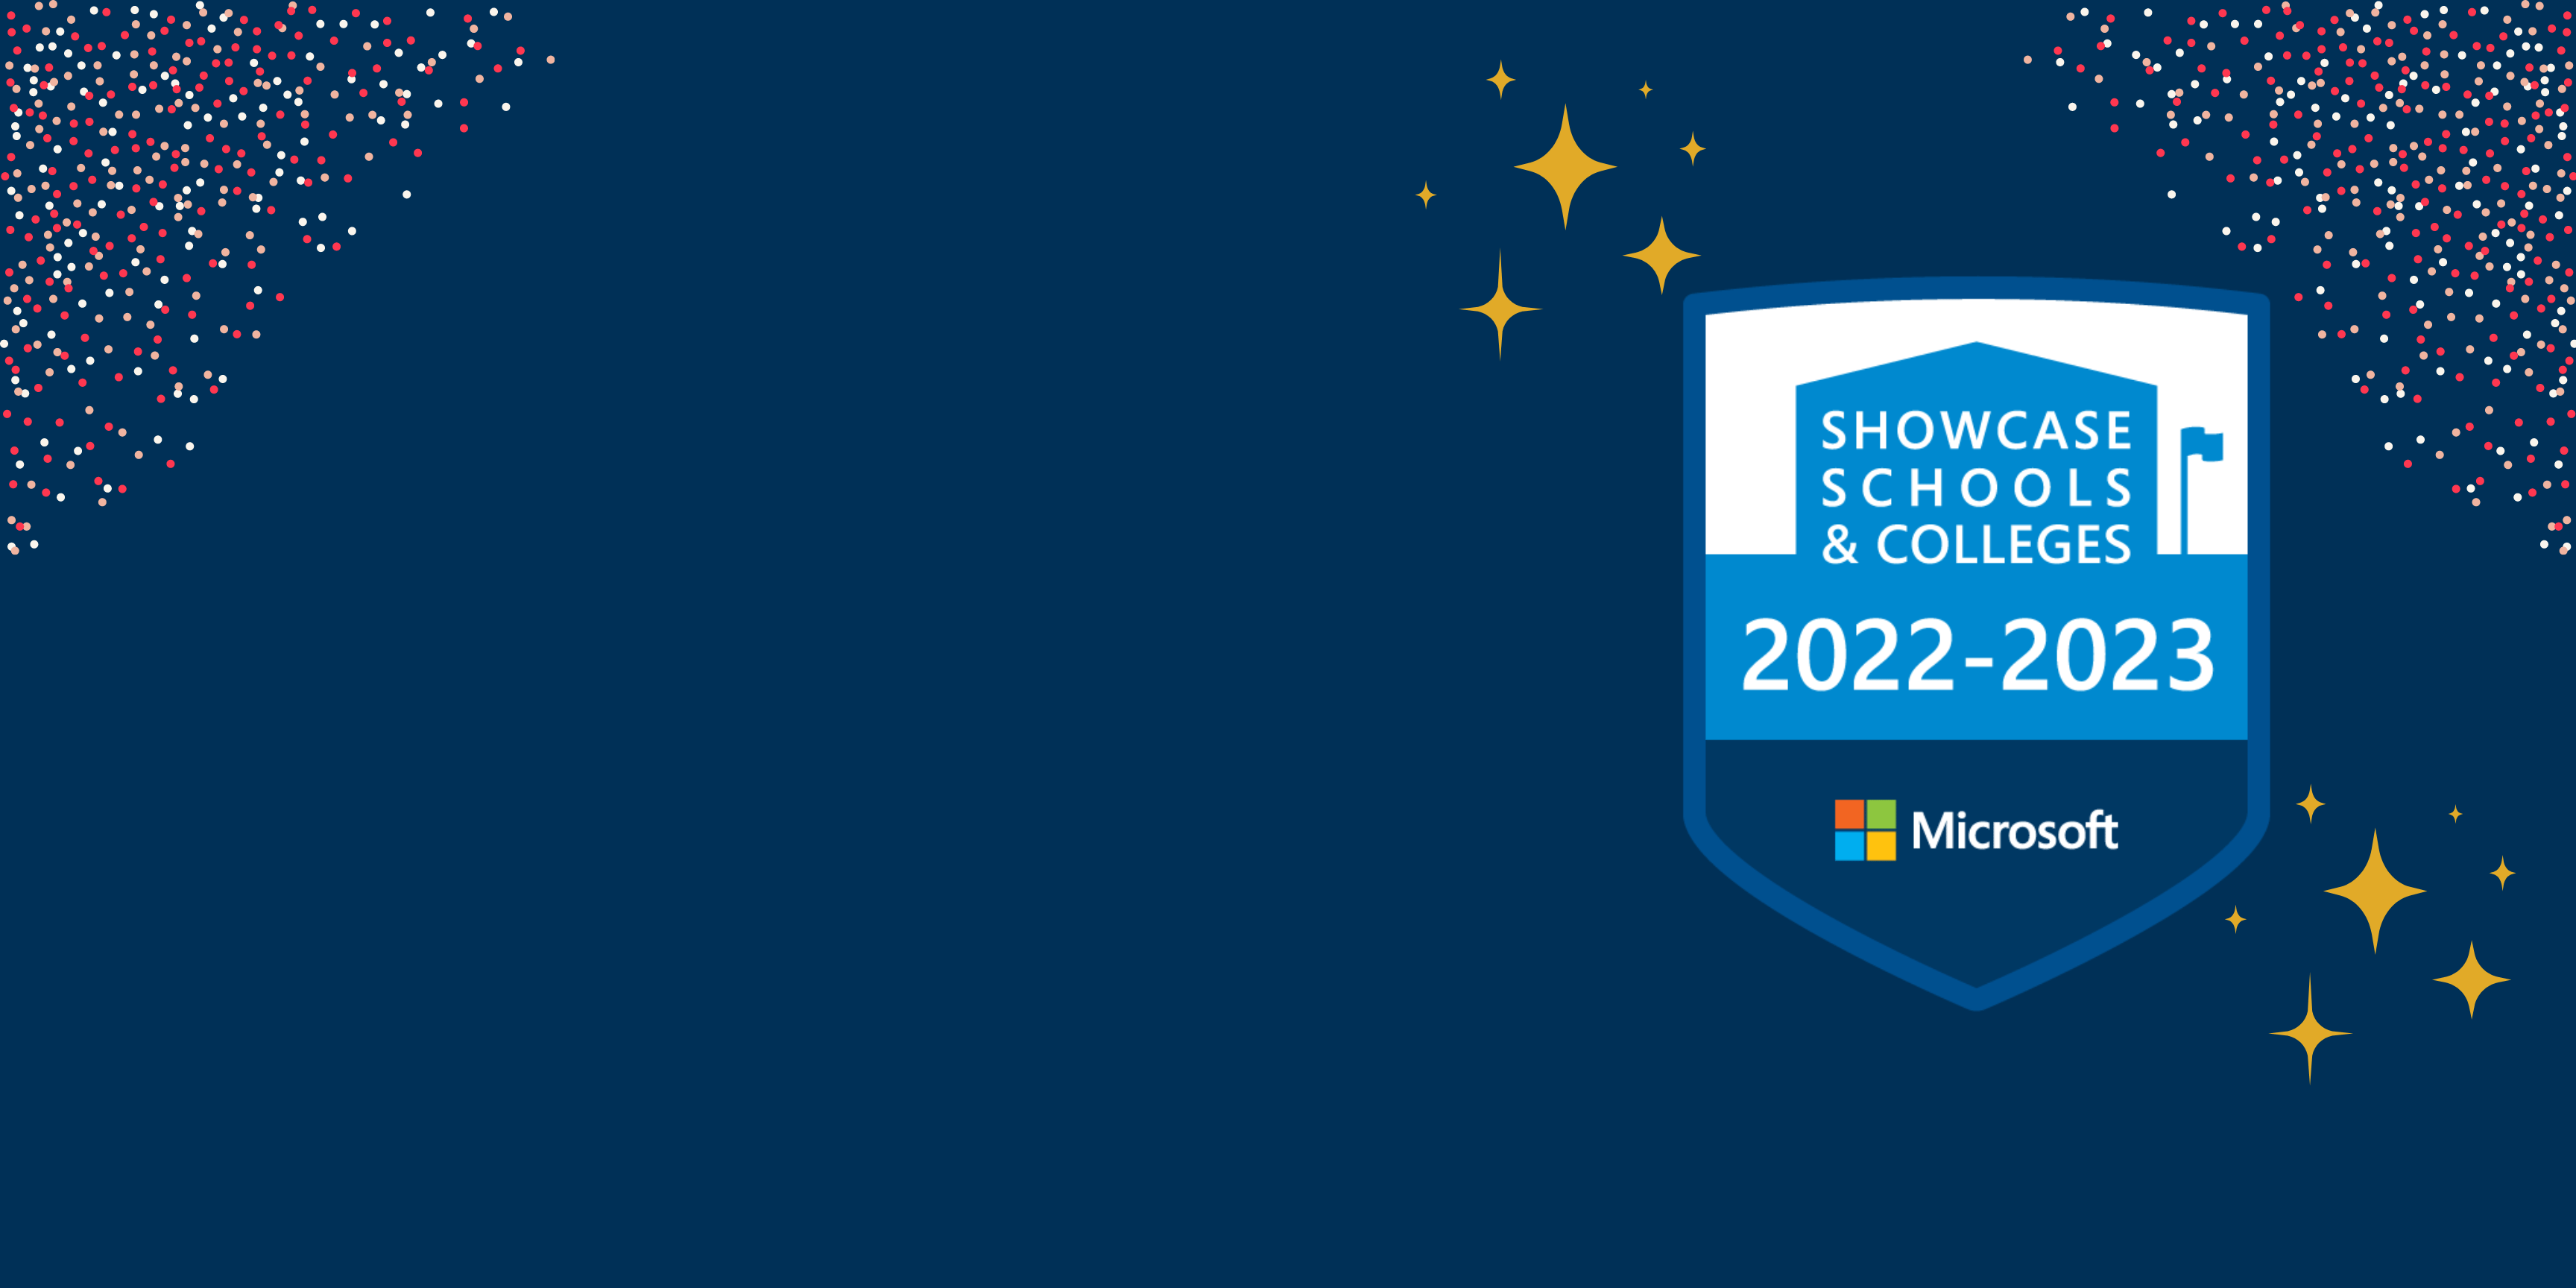 d'Overbroeck’s becomes a Microsoft Showcase School-doverbroecks-becomes-microsoft-showcase-school-MS-Showcase-website-banner-1